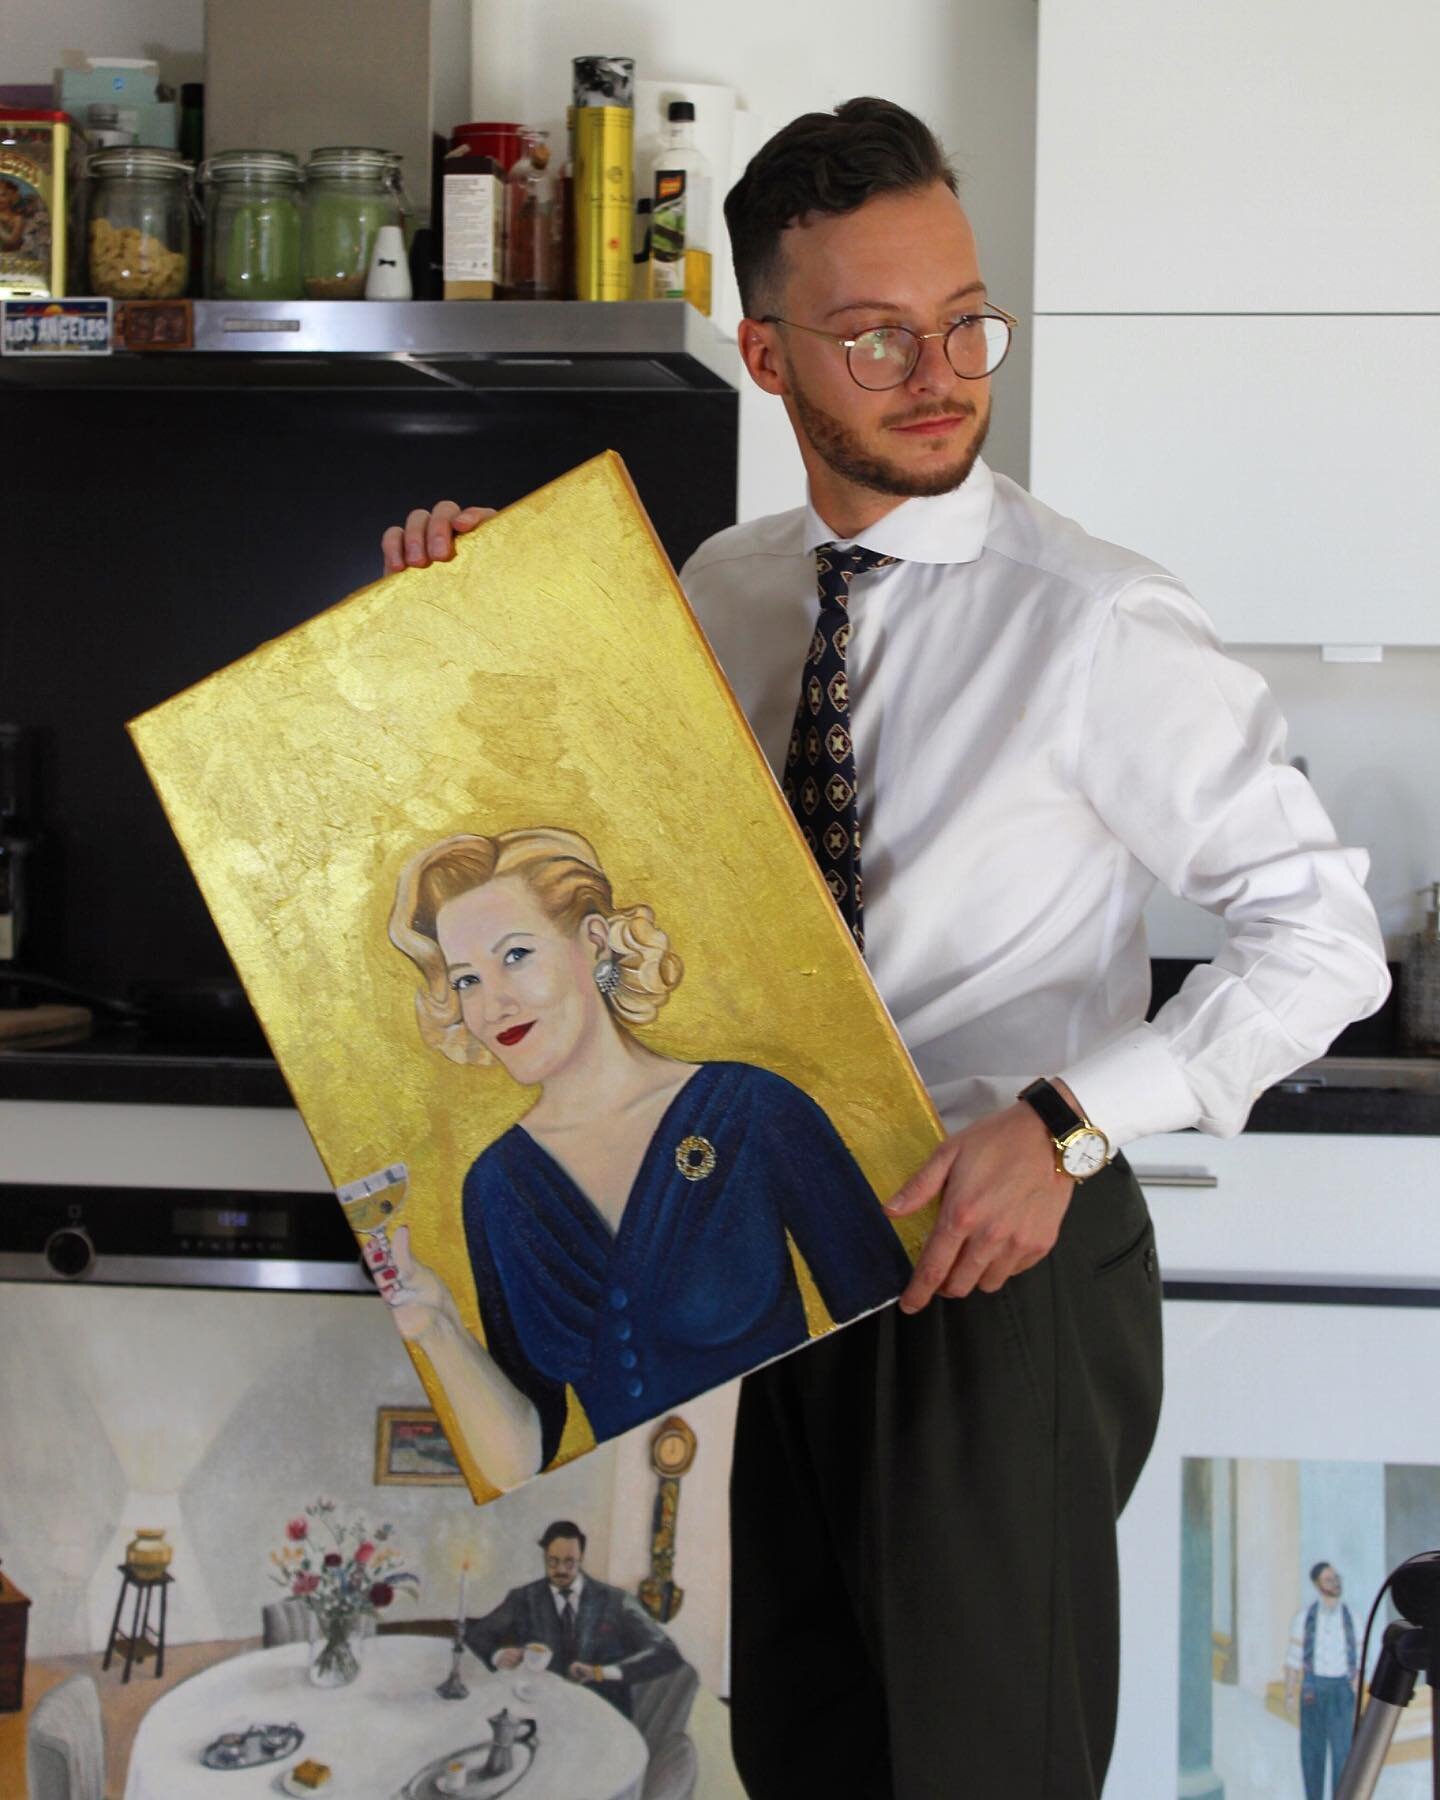 In my natural habitat, serving you glamour. ✨💎✨ 
Yes I do paint while wearing a tie and shirt. 
Would you like yourself or loved one portrayed like this too? Don&rsquo;t hesitate to contact me. 😉

#finearts #artist #goldenart #portrait #oilpainting